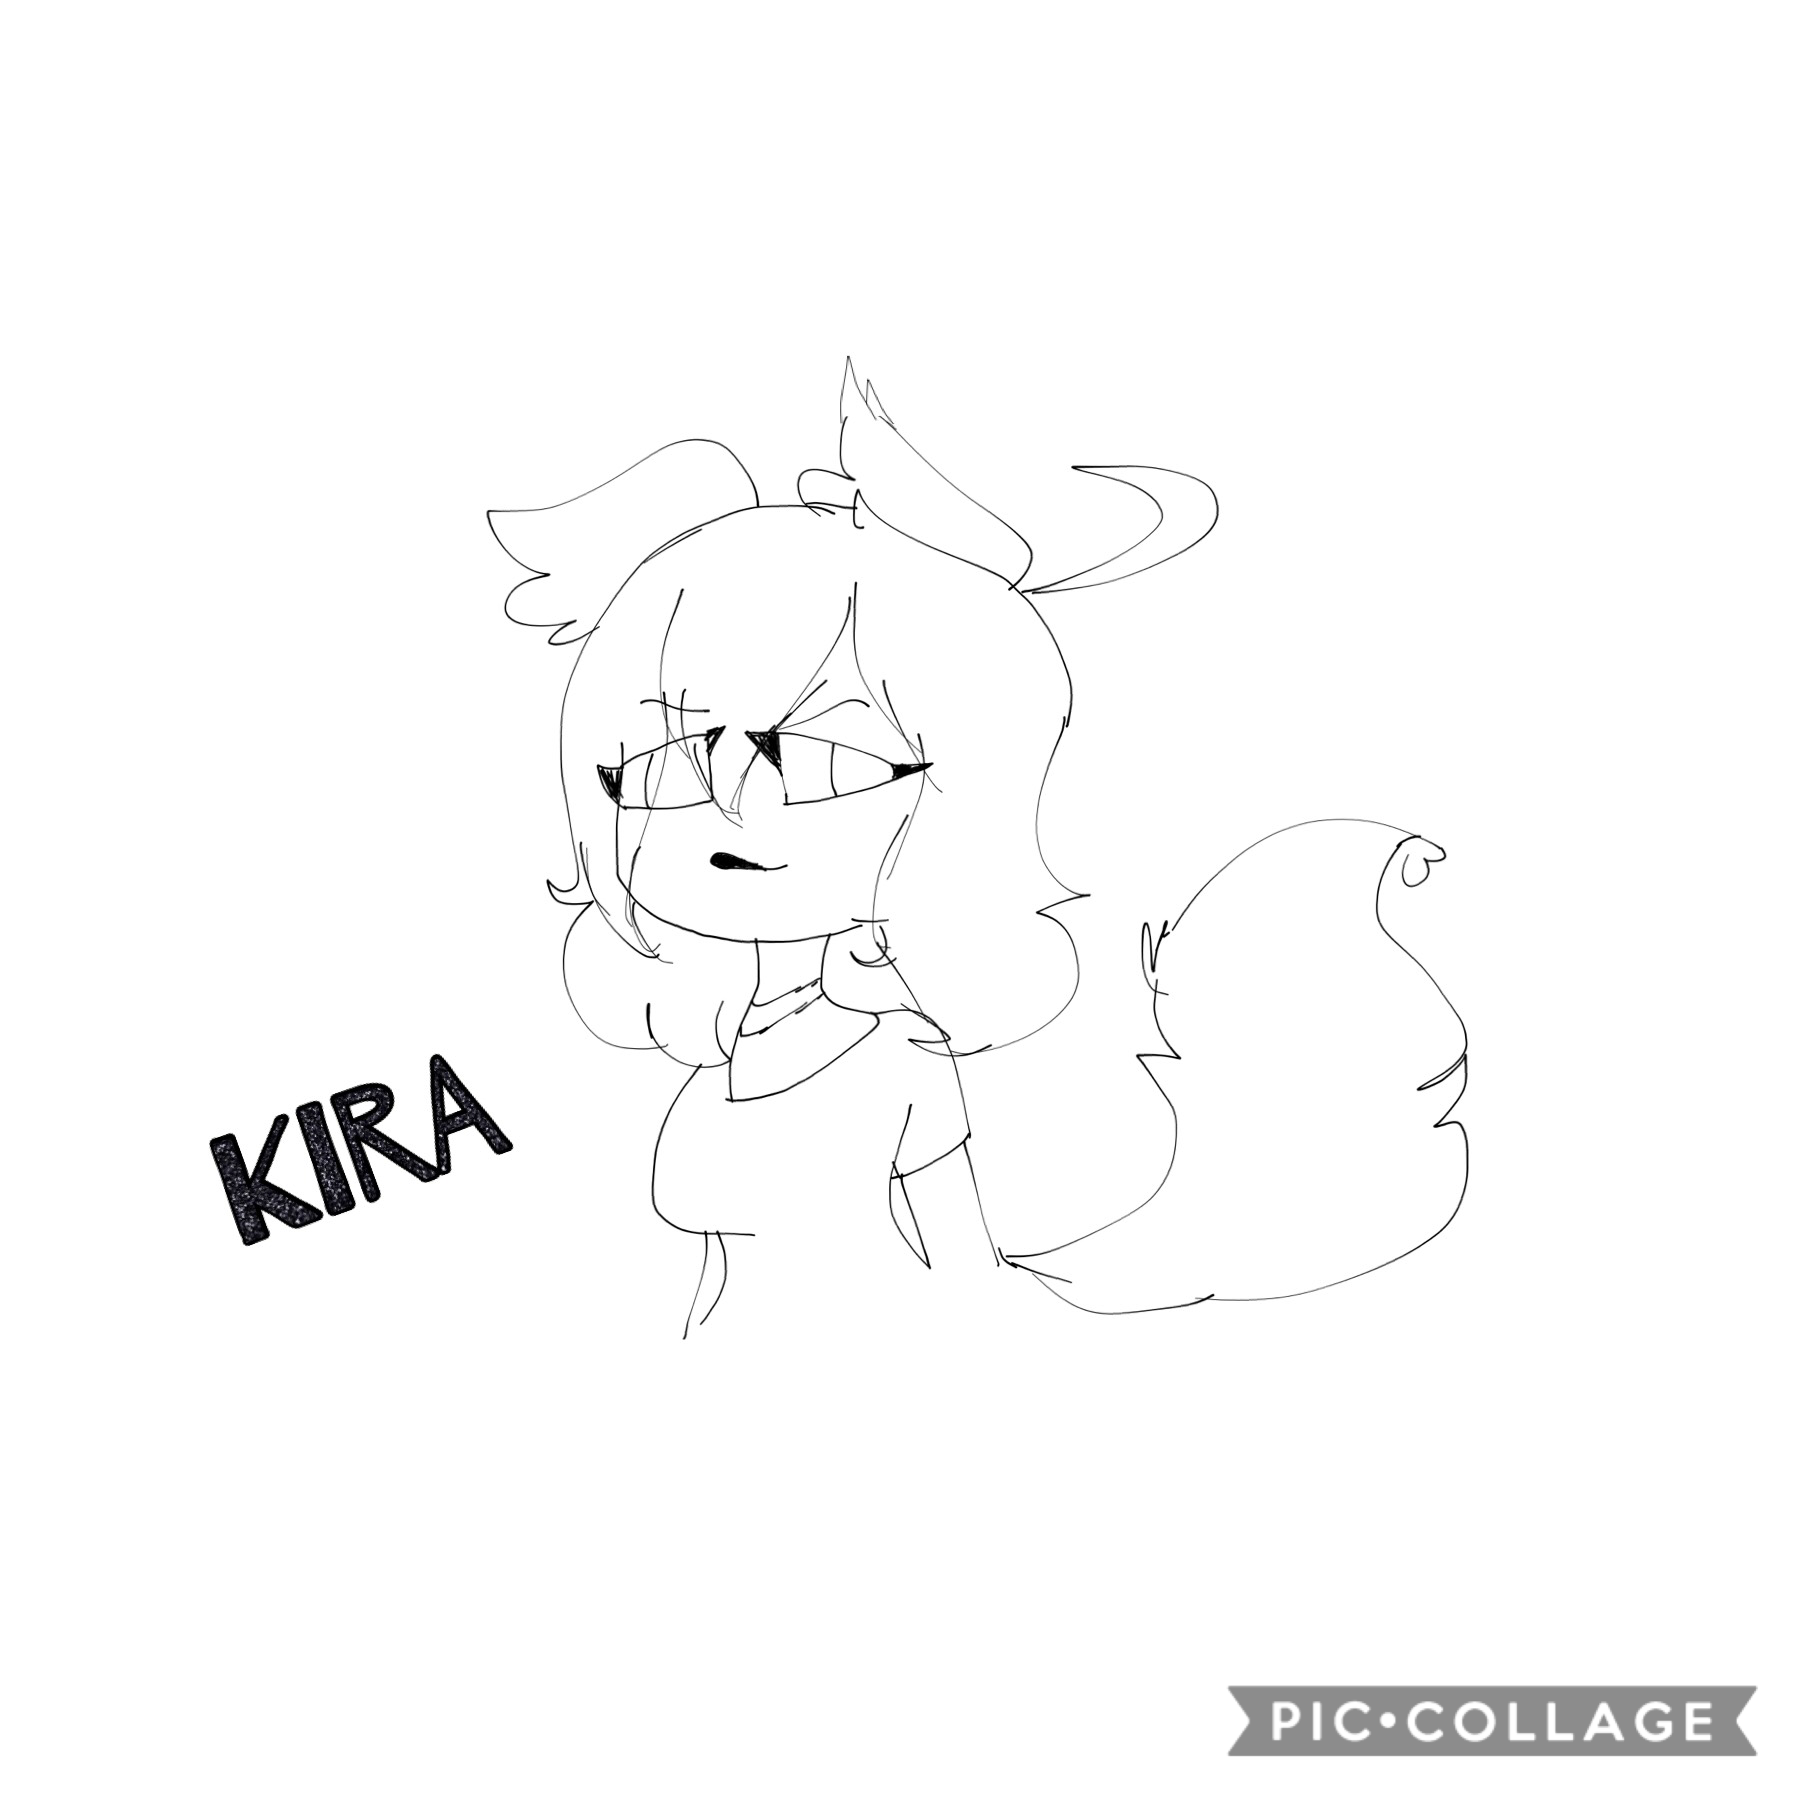 Upgraded my depression oc “Hopeless” now she has a new look and new name, “Kira”! Kira means ‘dark’